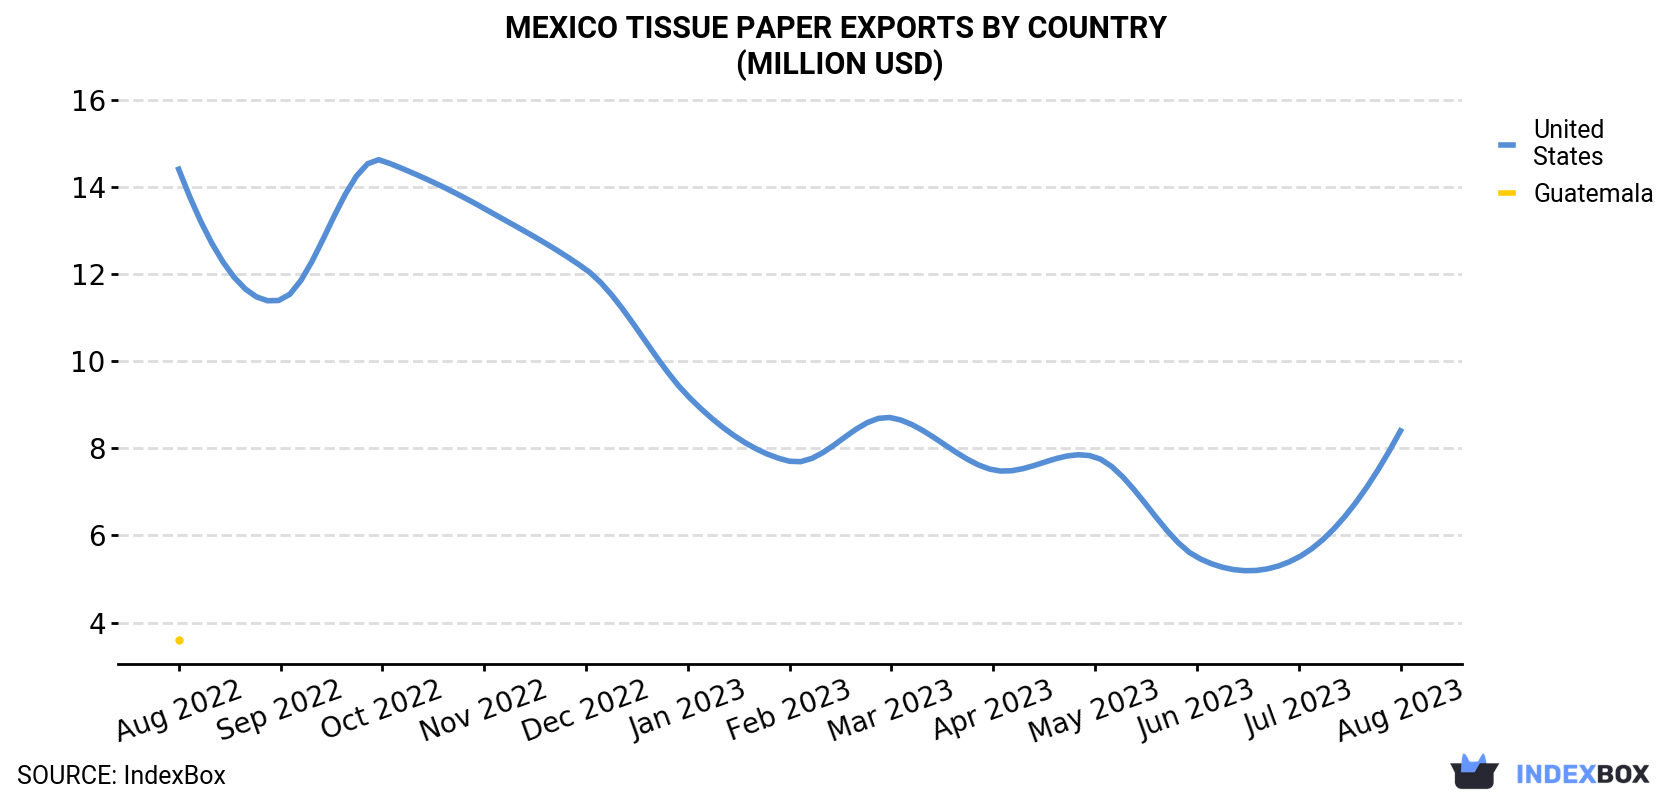 Mexico Tissue Paper Exports By Country (Million USD)